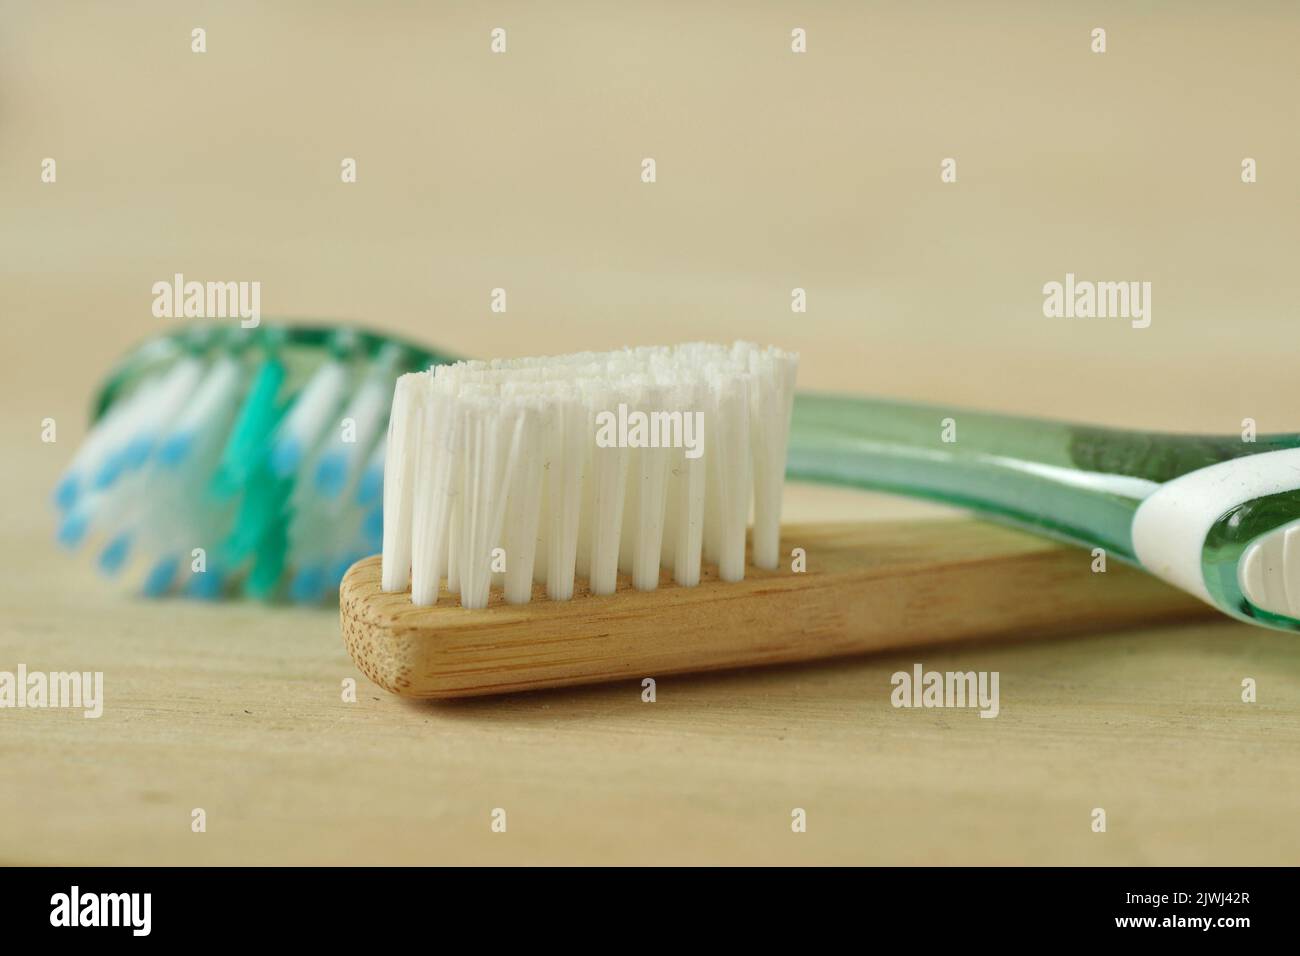 Close-up of wooden and plastic toothbrush - Concept of ecology and plastic pollution problem Stock Photo